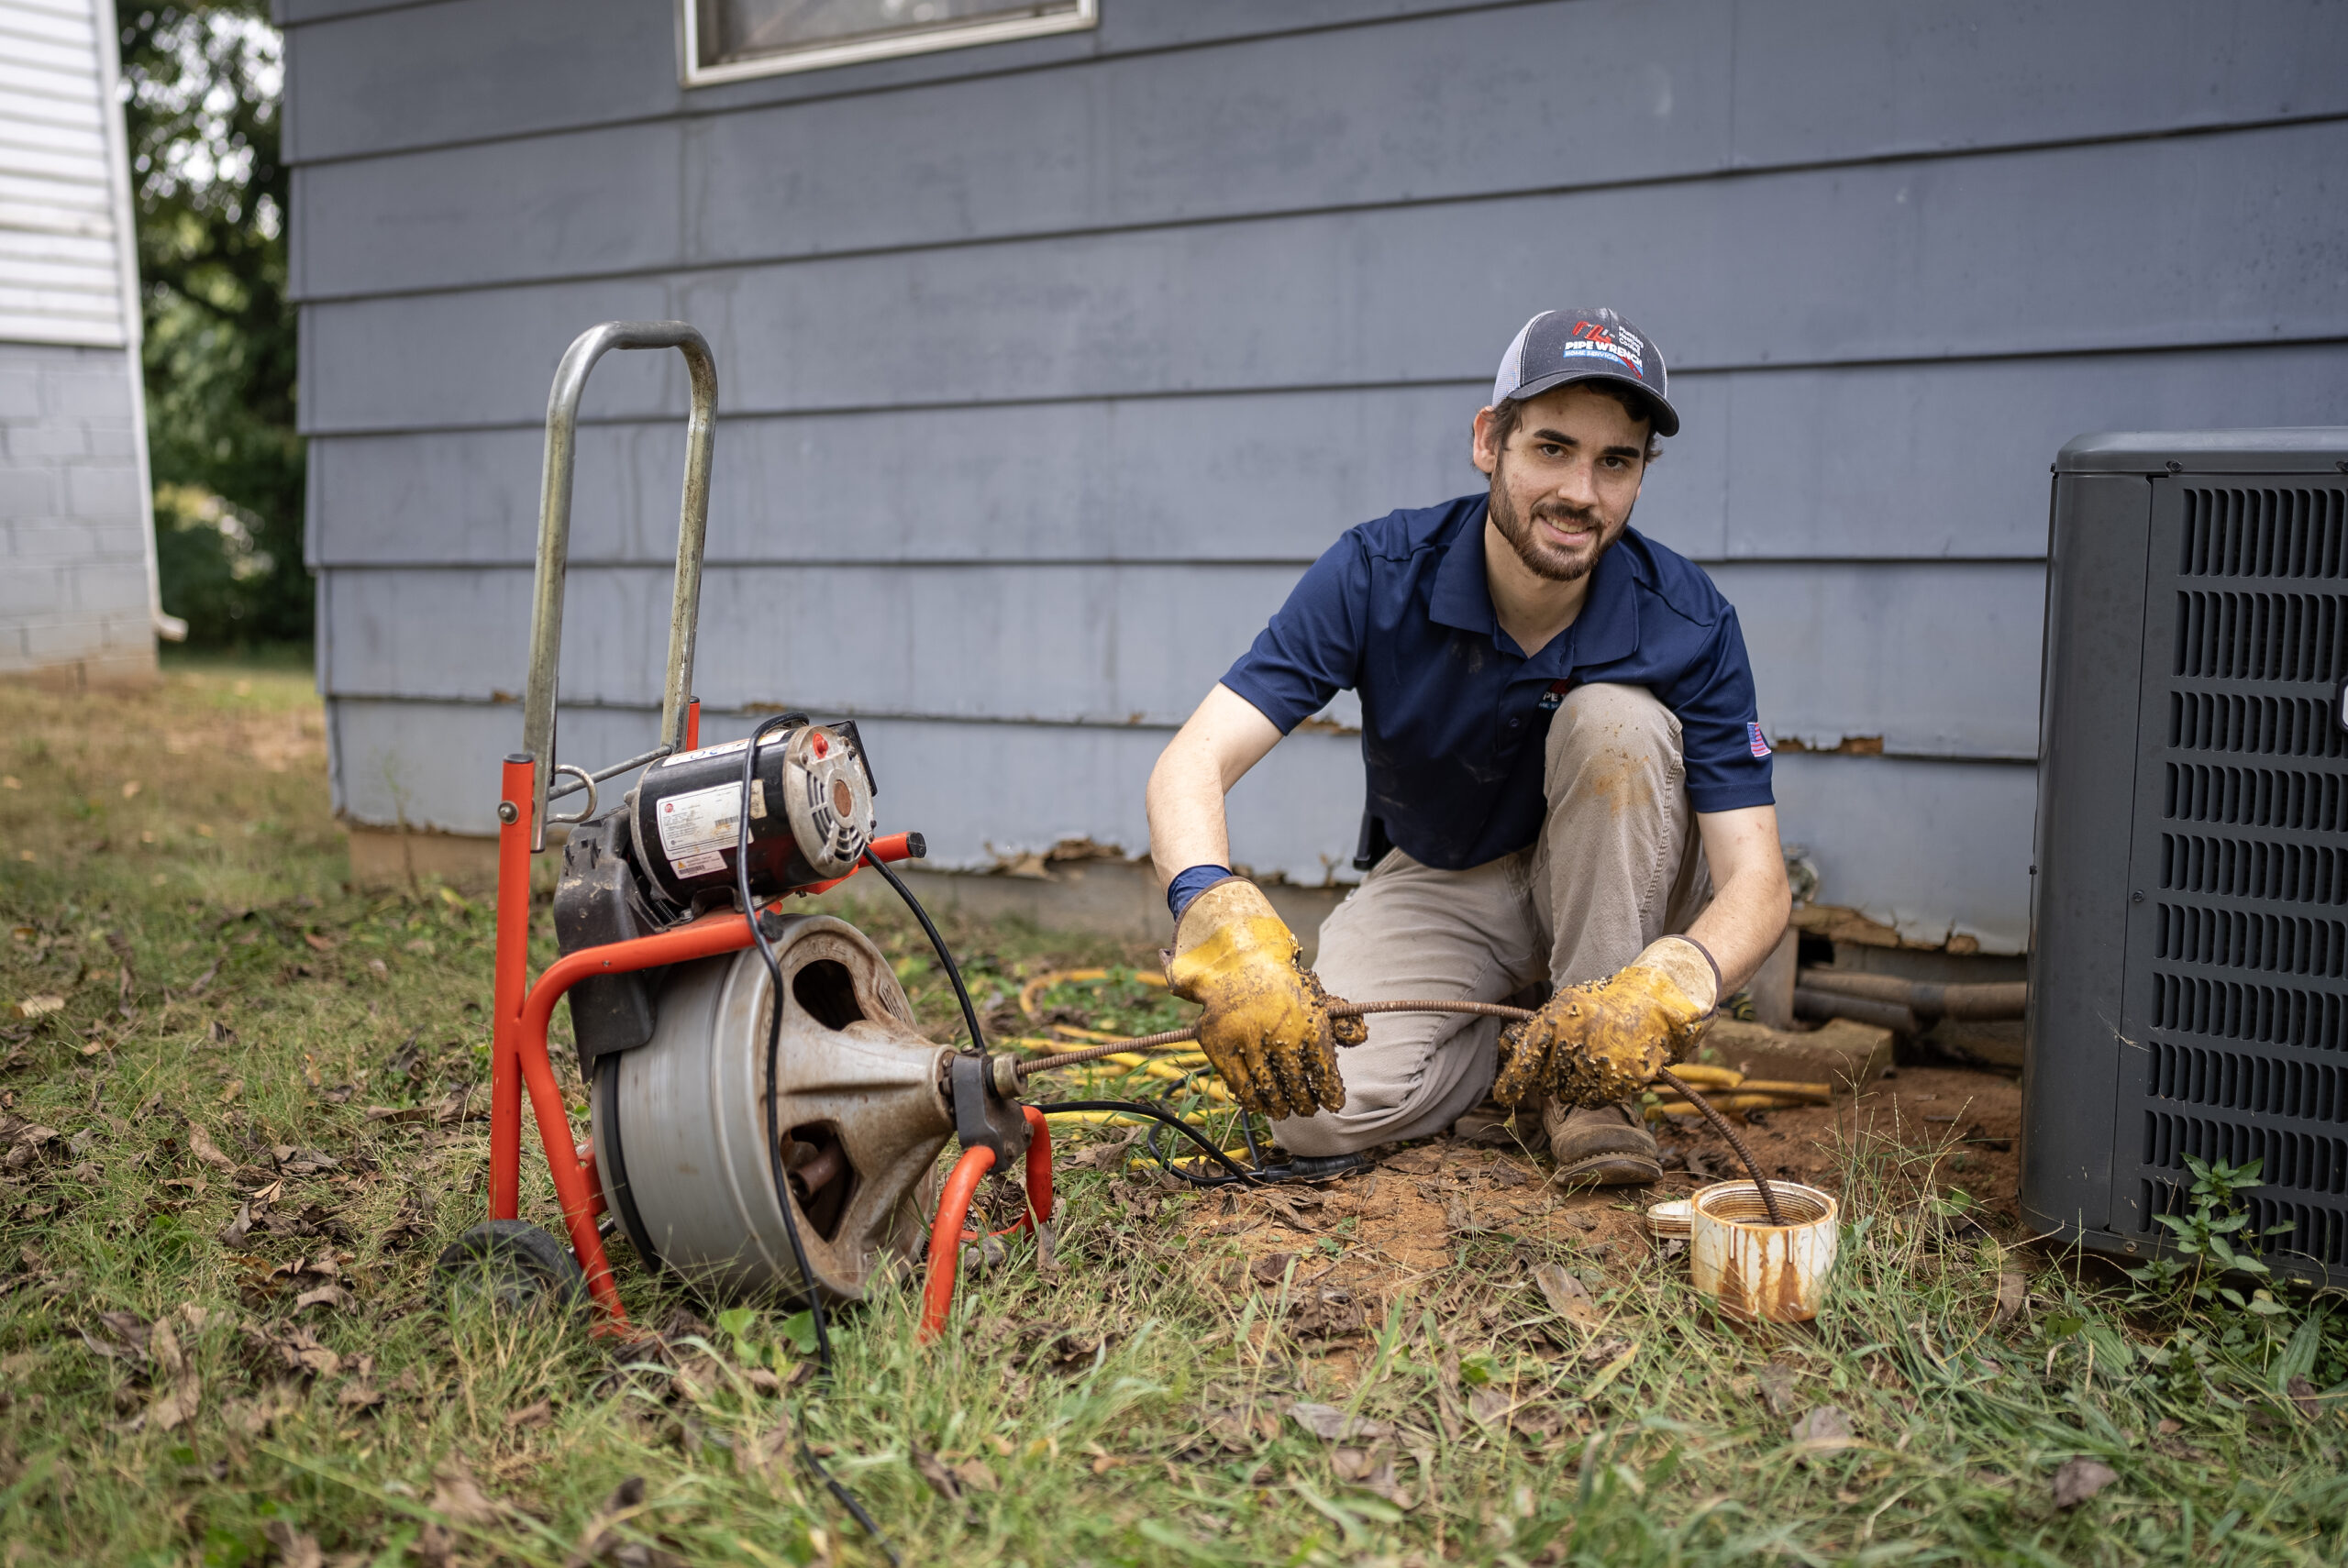 Technician kneeling in yard, performing a drain cleaning